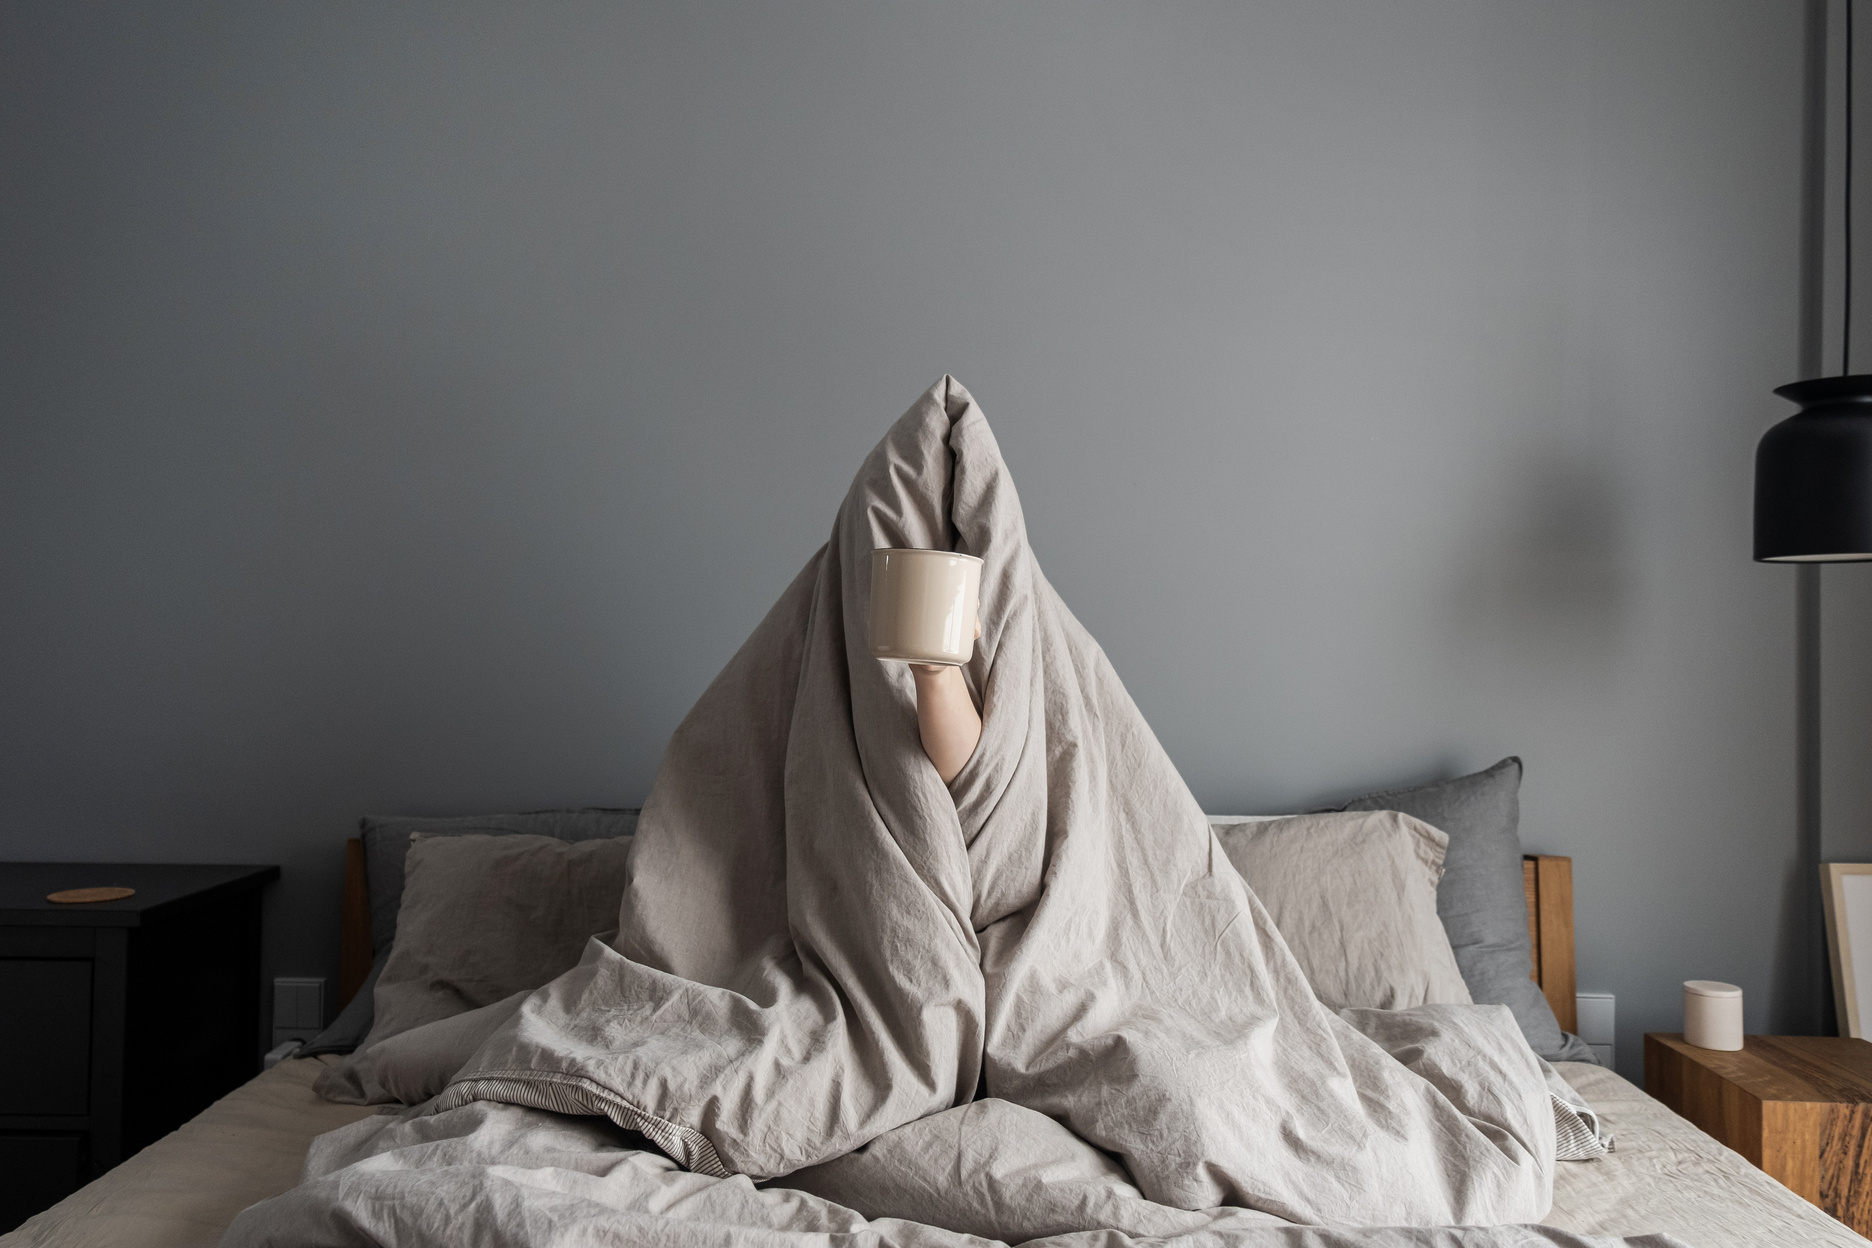 Woman Covered in Blanket Holding a Cup on the Bed